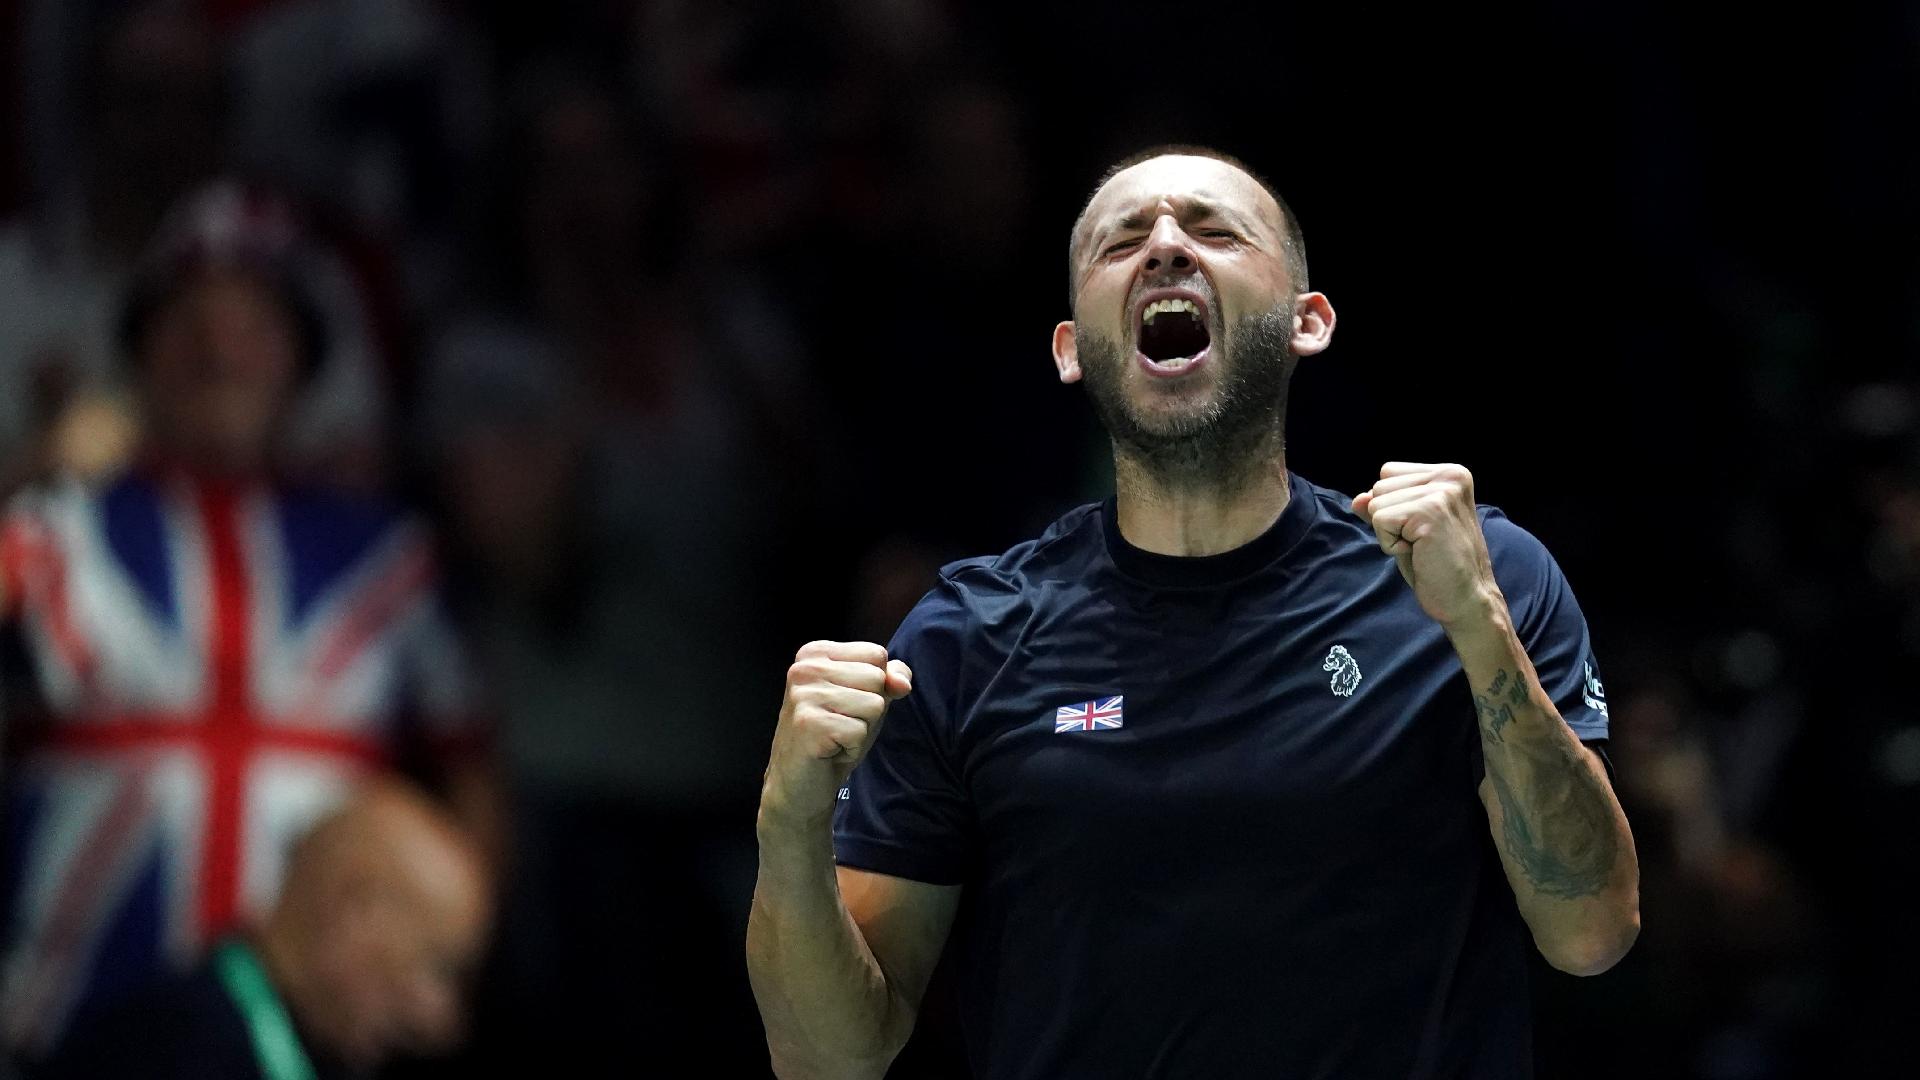 Dan Evans leads Great Britain to Davis Cup win over France and last-eight spot